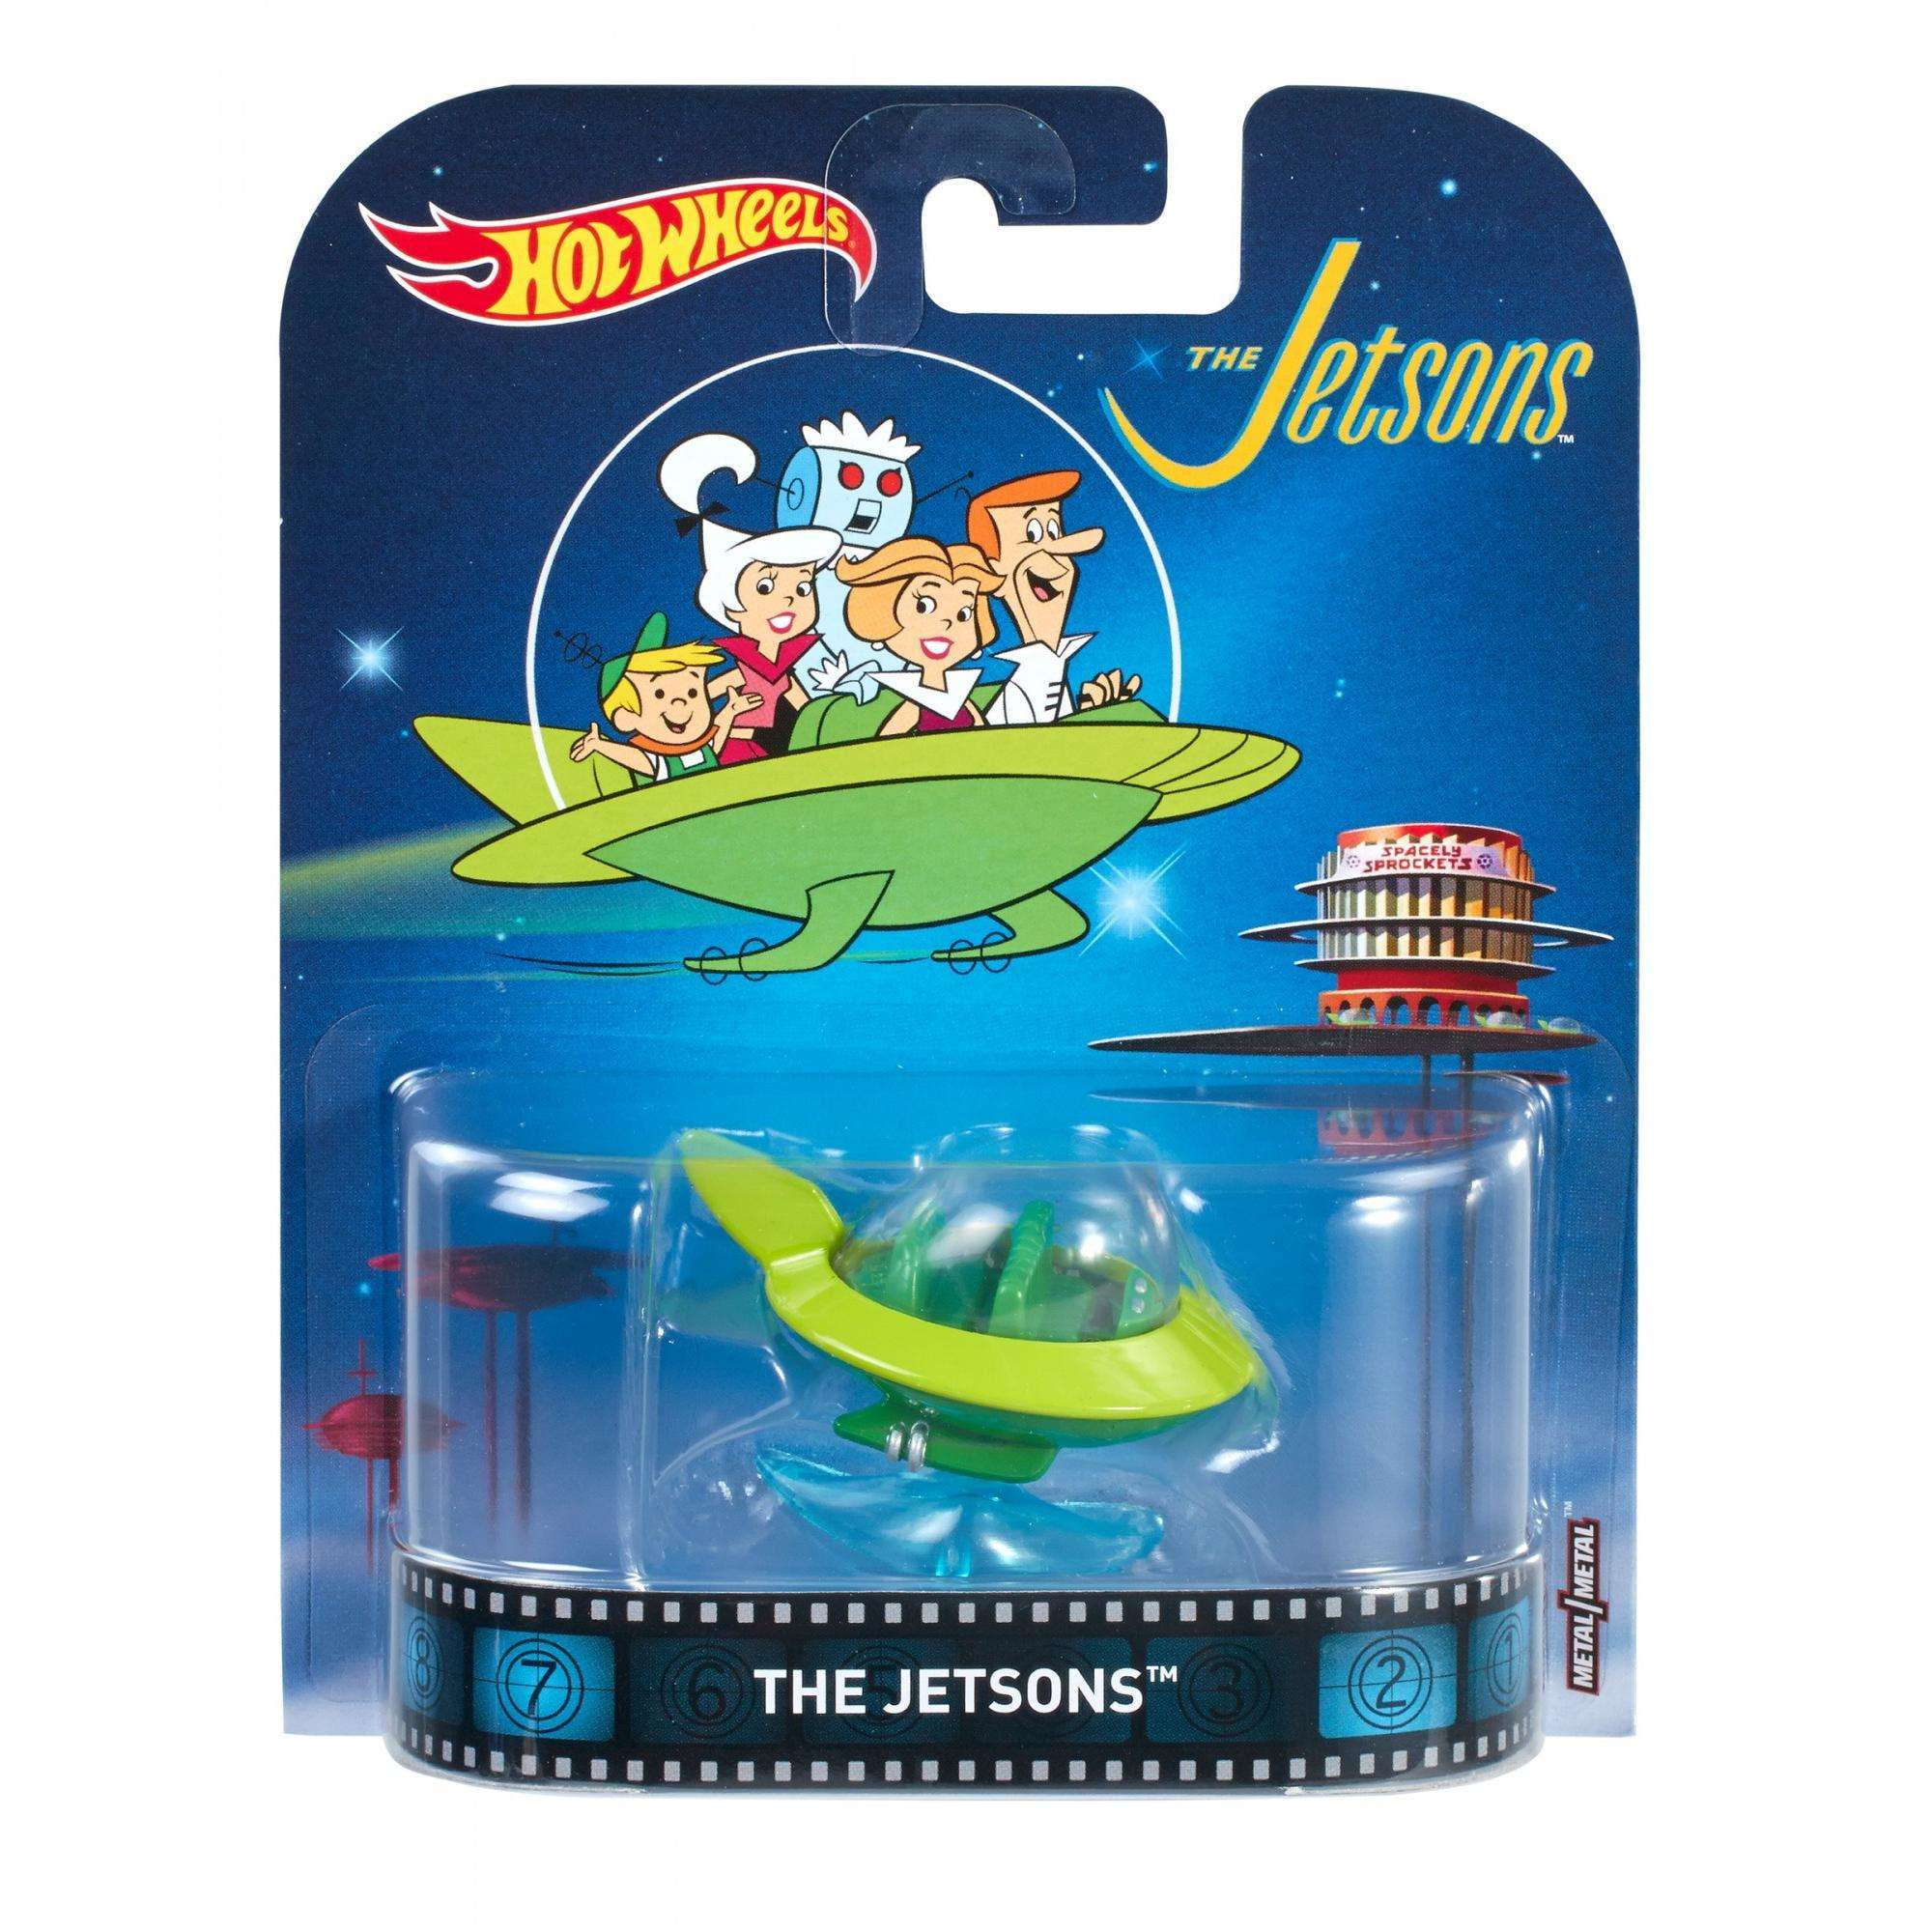 Case D 2015 Hot Wheels New THE JETSONS Capsule Car #57 US ✈Green;oh5✈Tooned